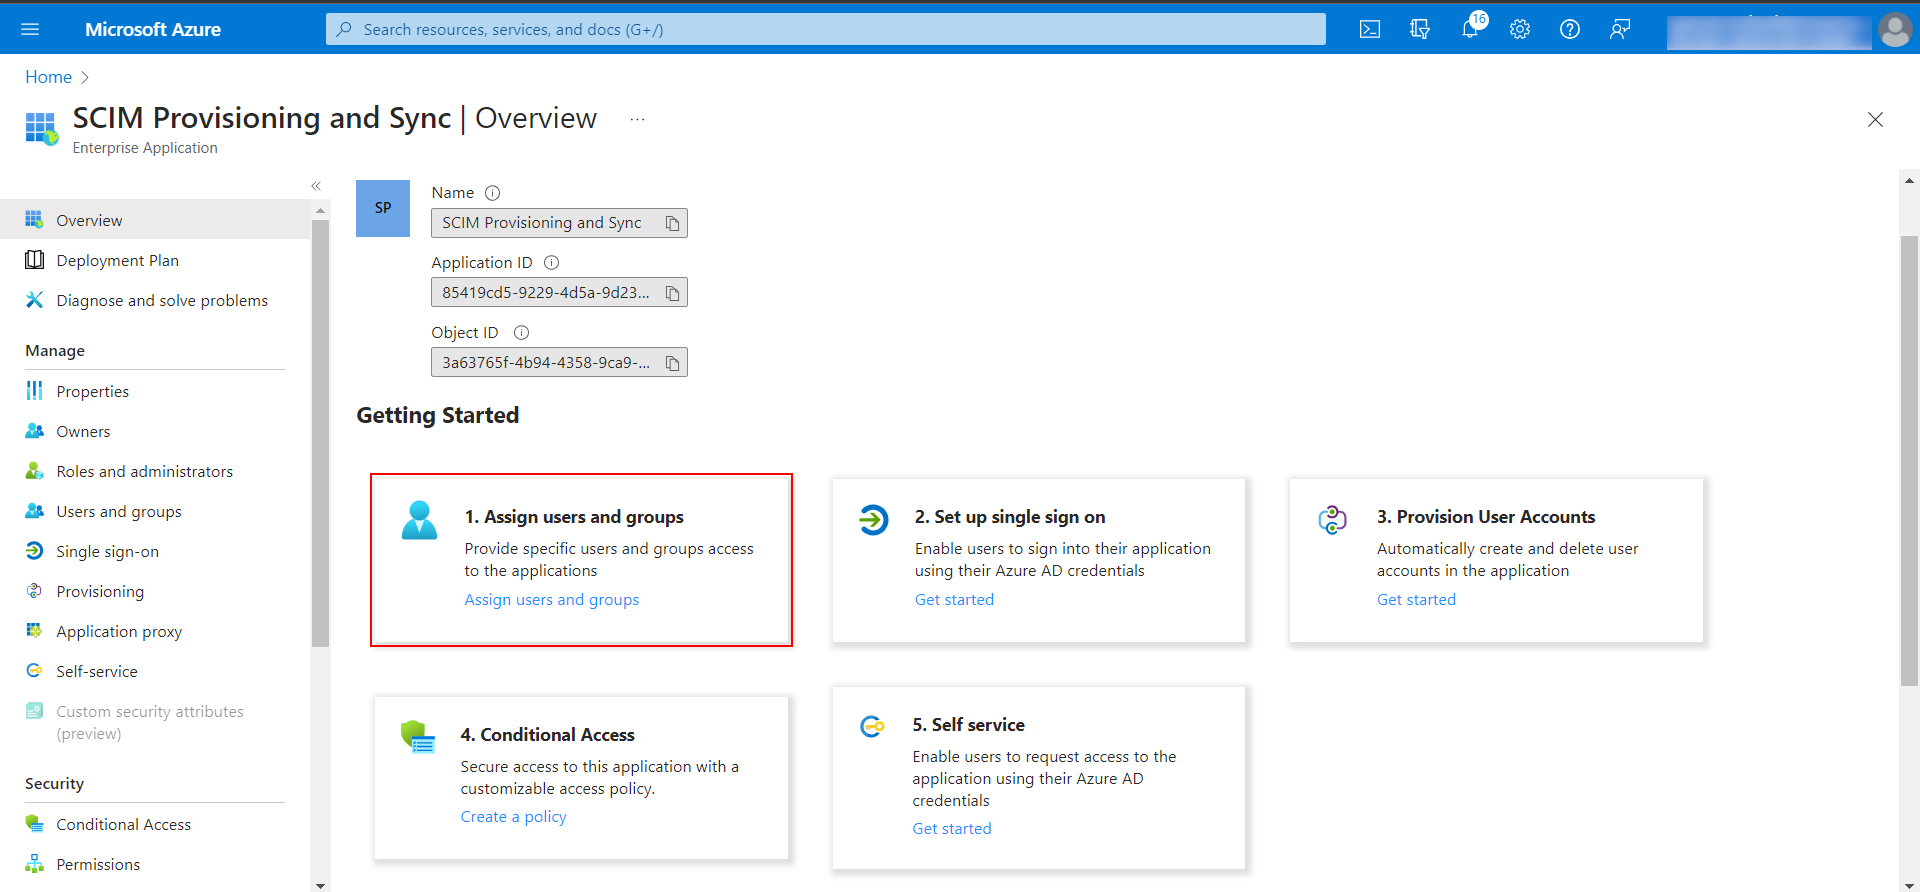 DotNetNuke (DNN) SCIM User Provisioning with Azure AD | DNN SCIM - From the Getting started section, click on the Assign users and groups link